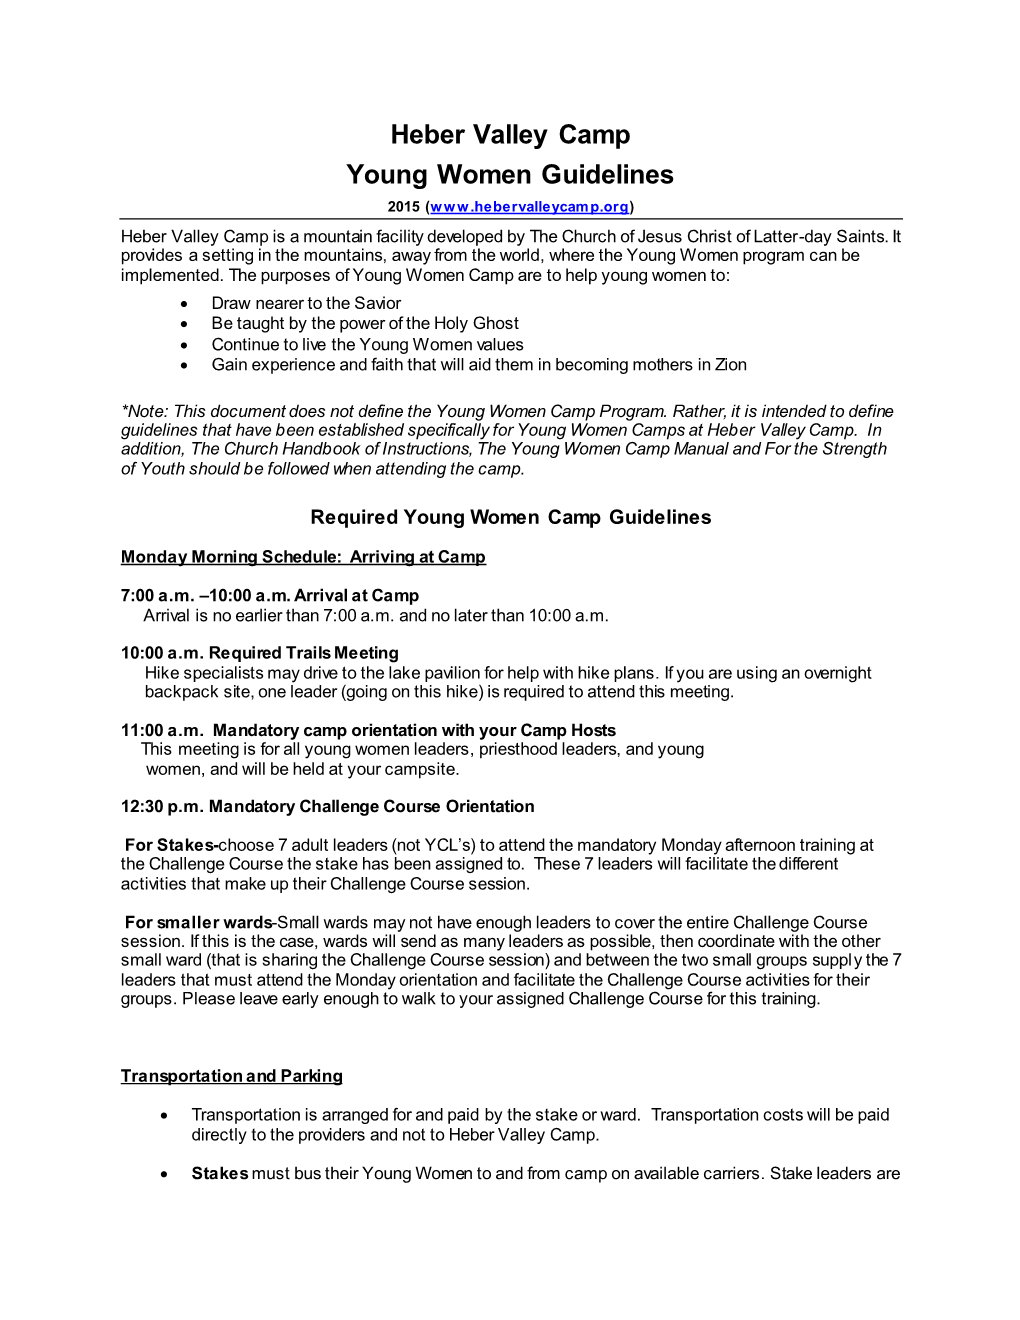 Heber Valley Camp Young Women Guidelines